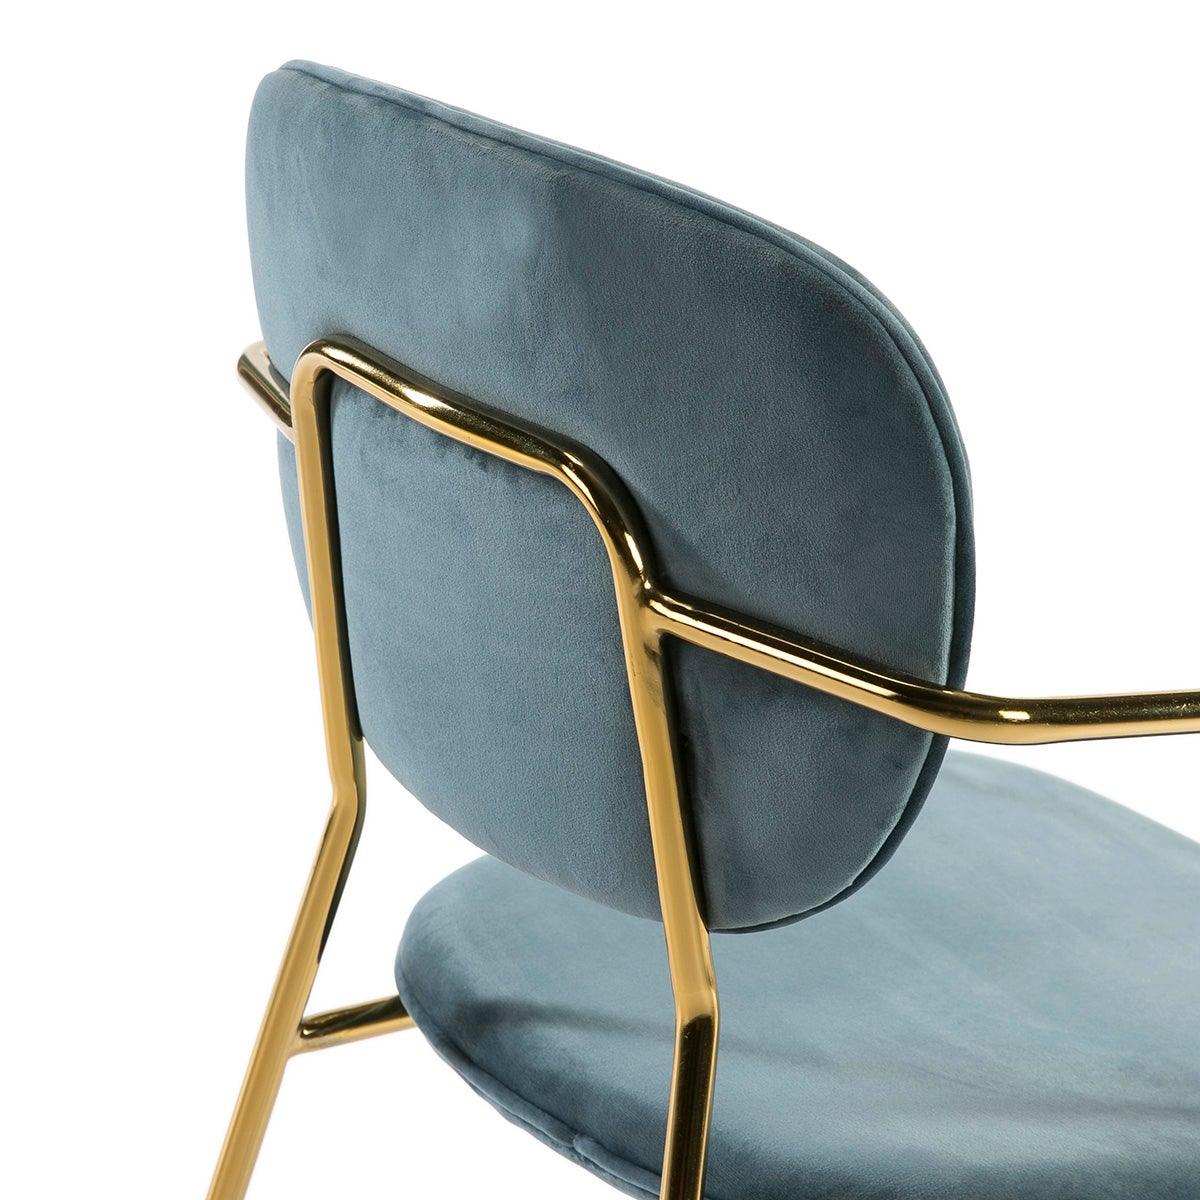 Gold Metal Chair W/Arms